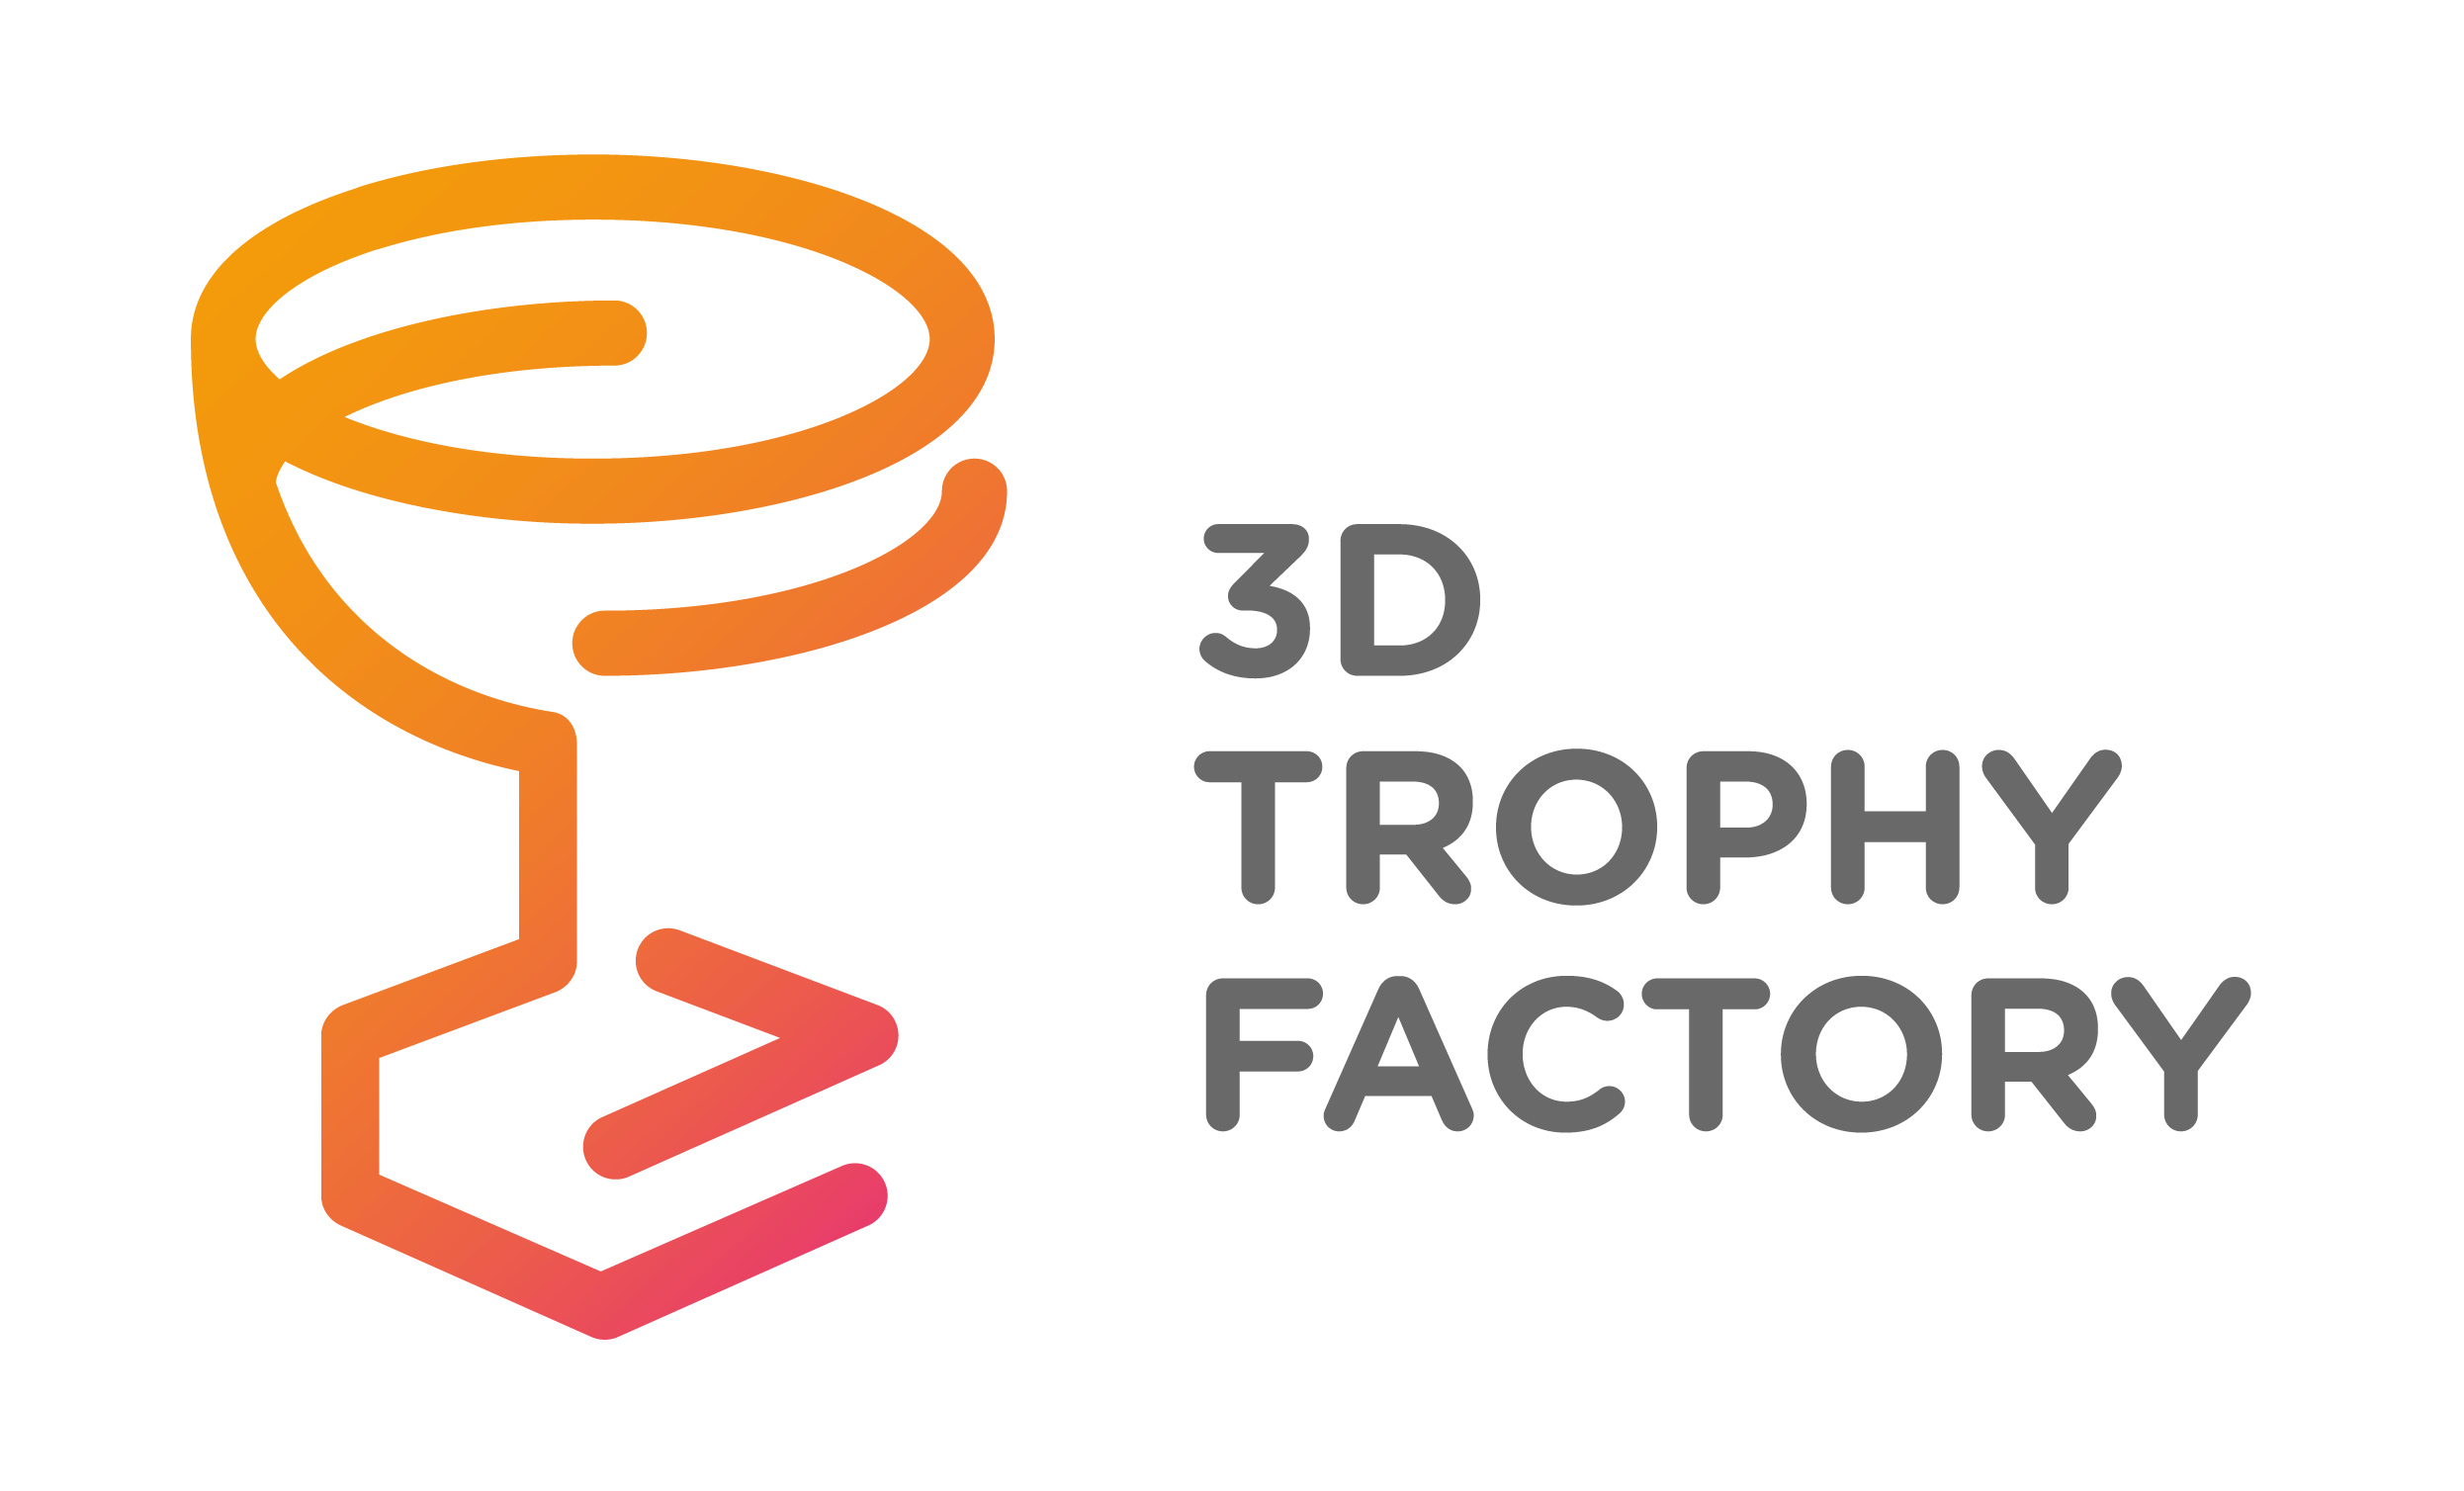 Trophy Logo - Check out our new trophy logo and website!